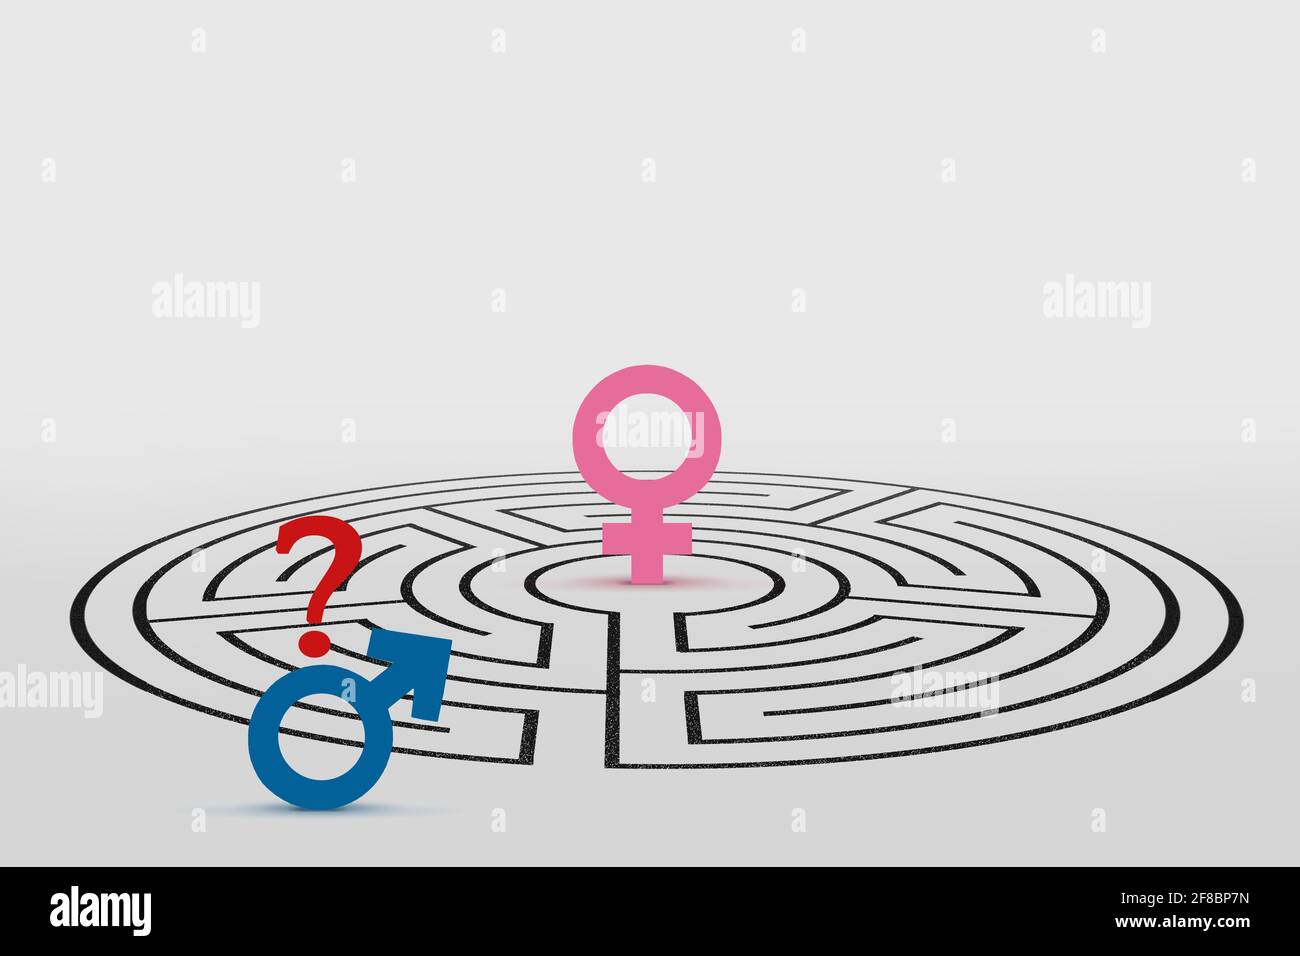 Female symbol in a labyrinth and male symbol with question mark - Concept of male and female psychology Stock Photo